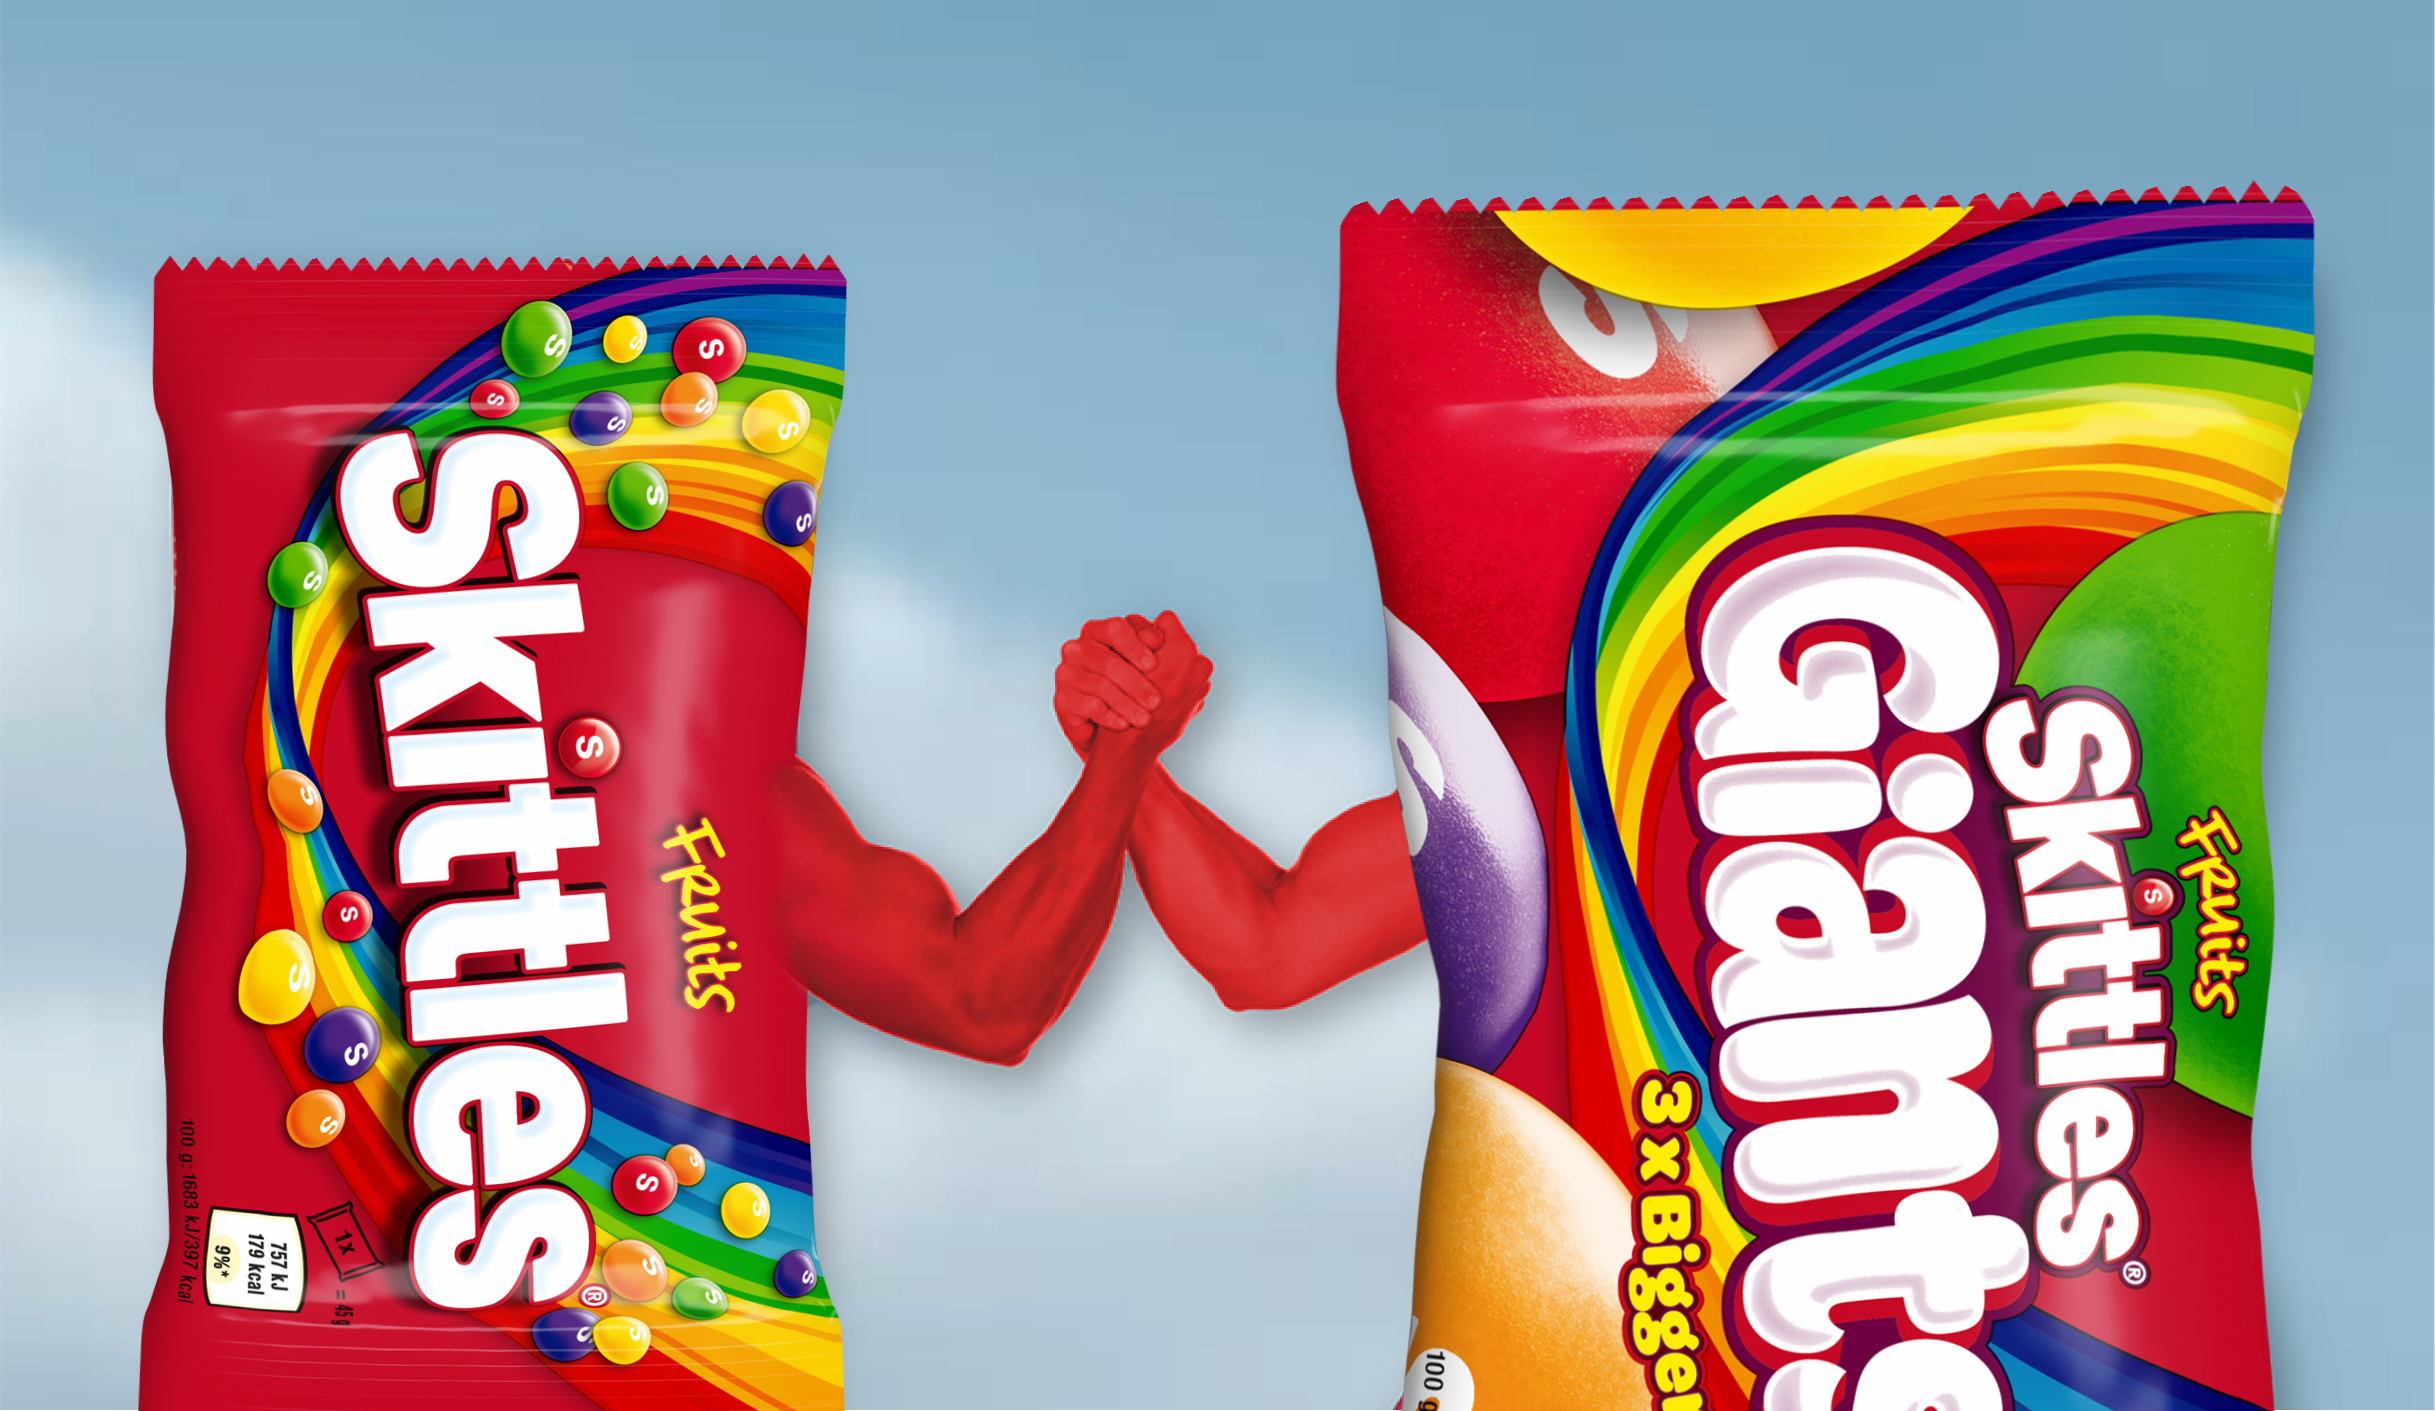 Skittles packages holding hands